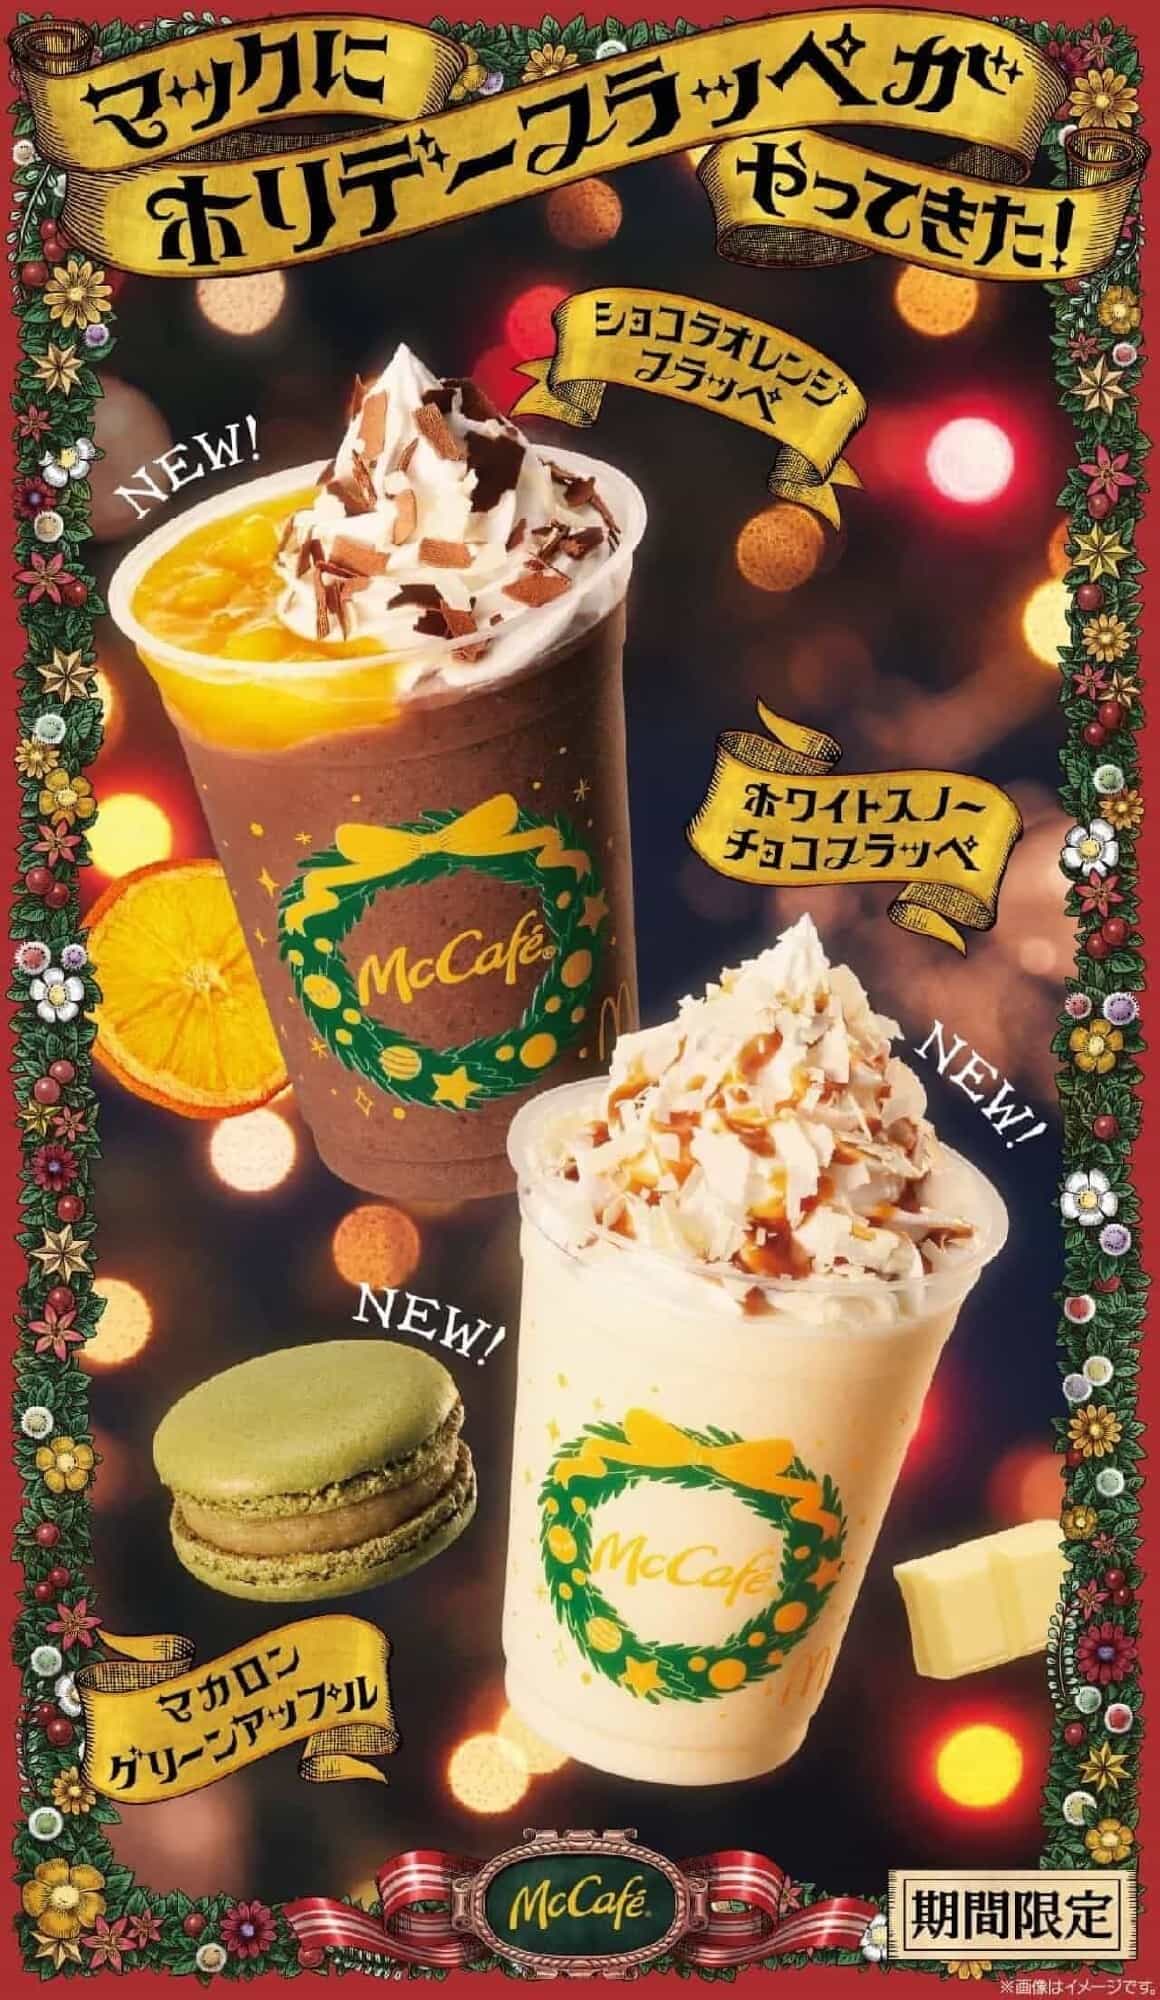 McDonald's launches two kinds of "Holiday Frappe" and winter limited edition macarons